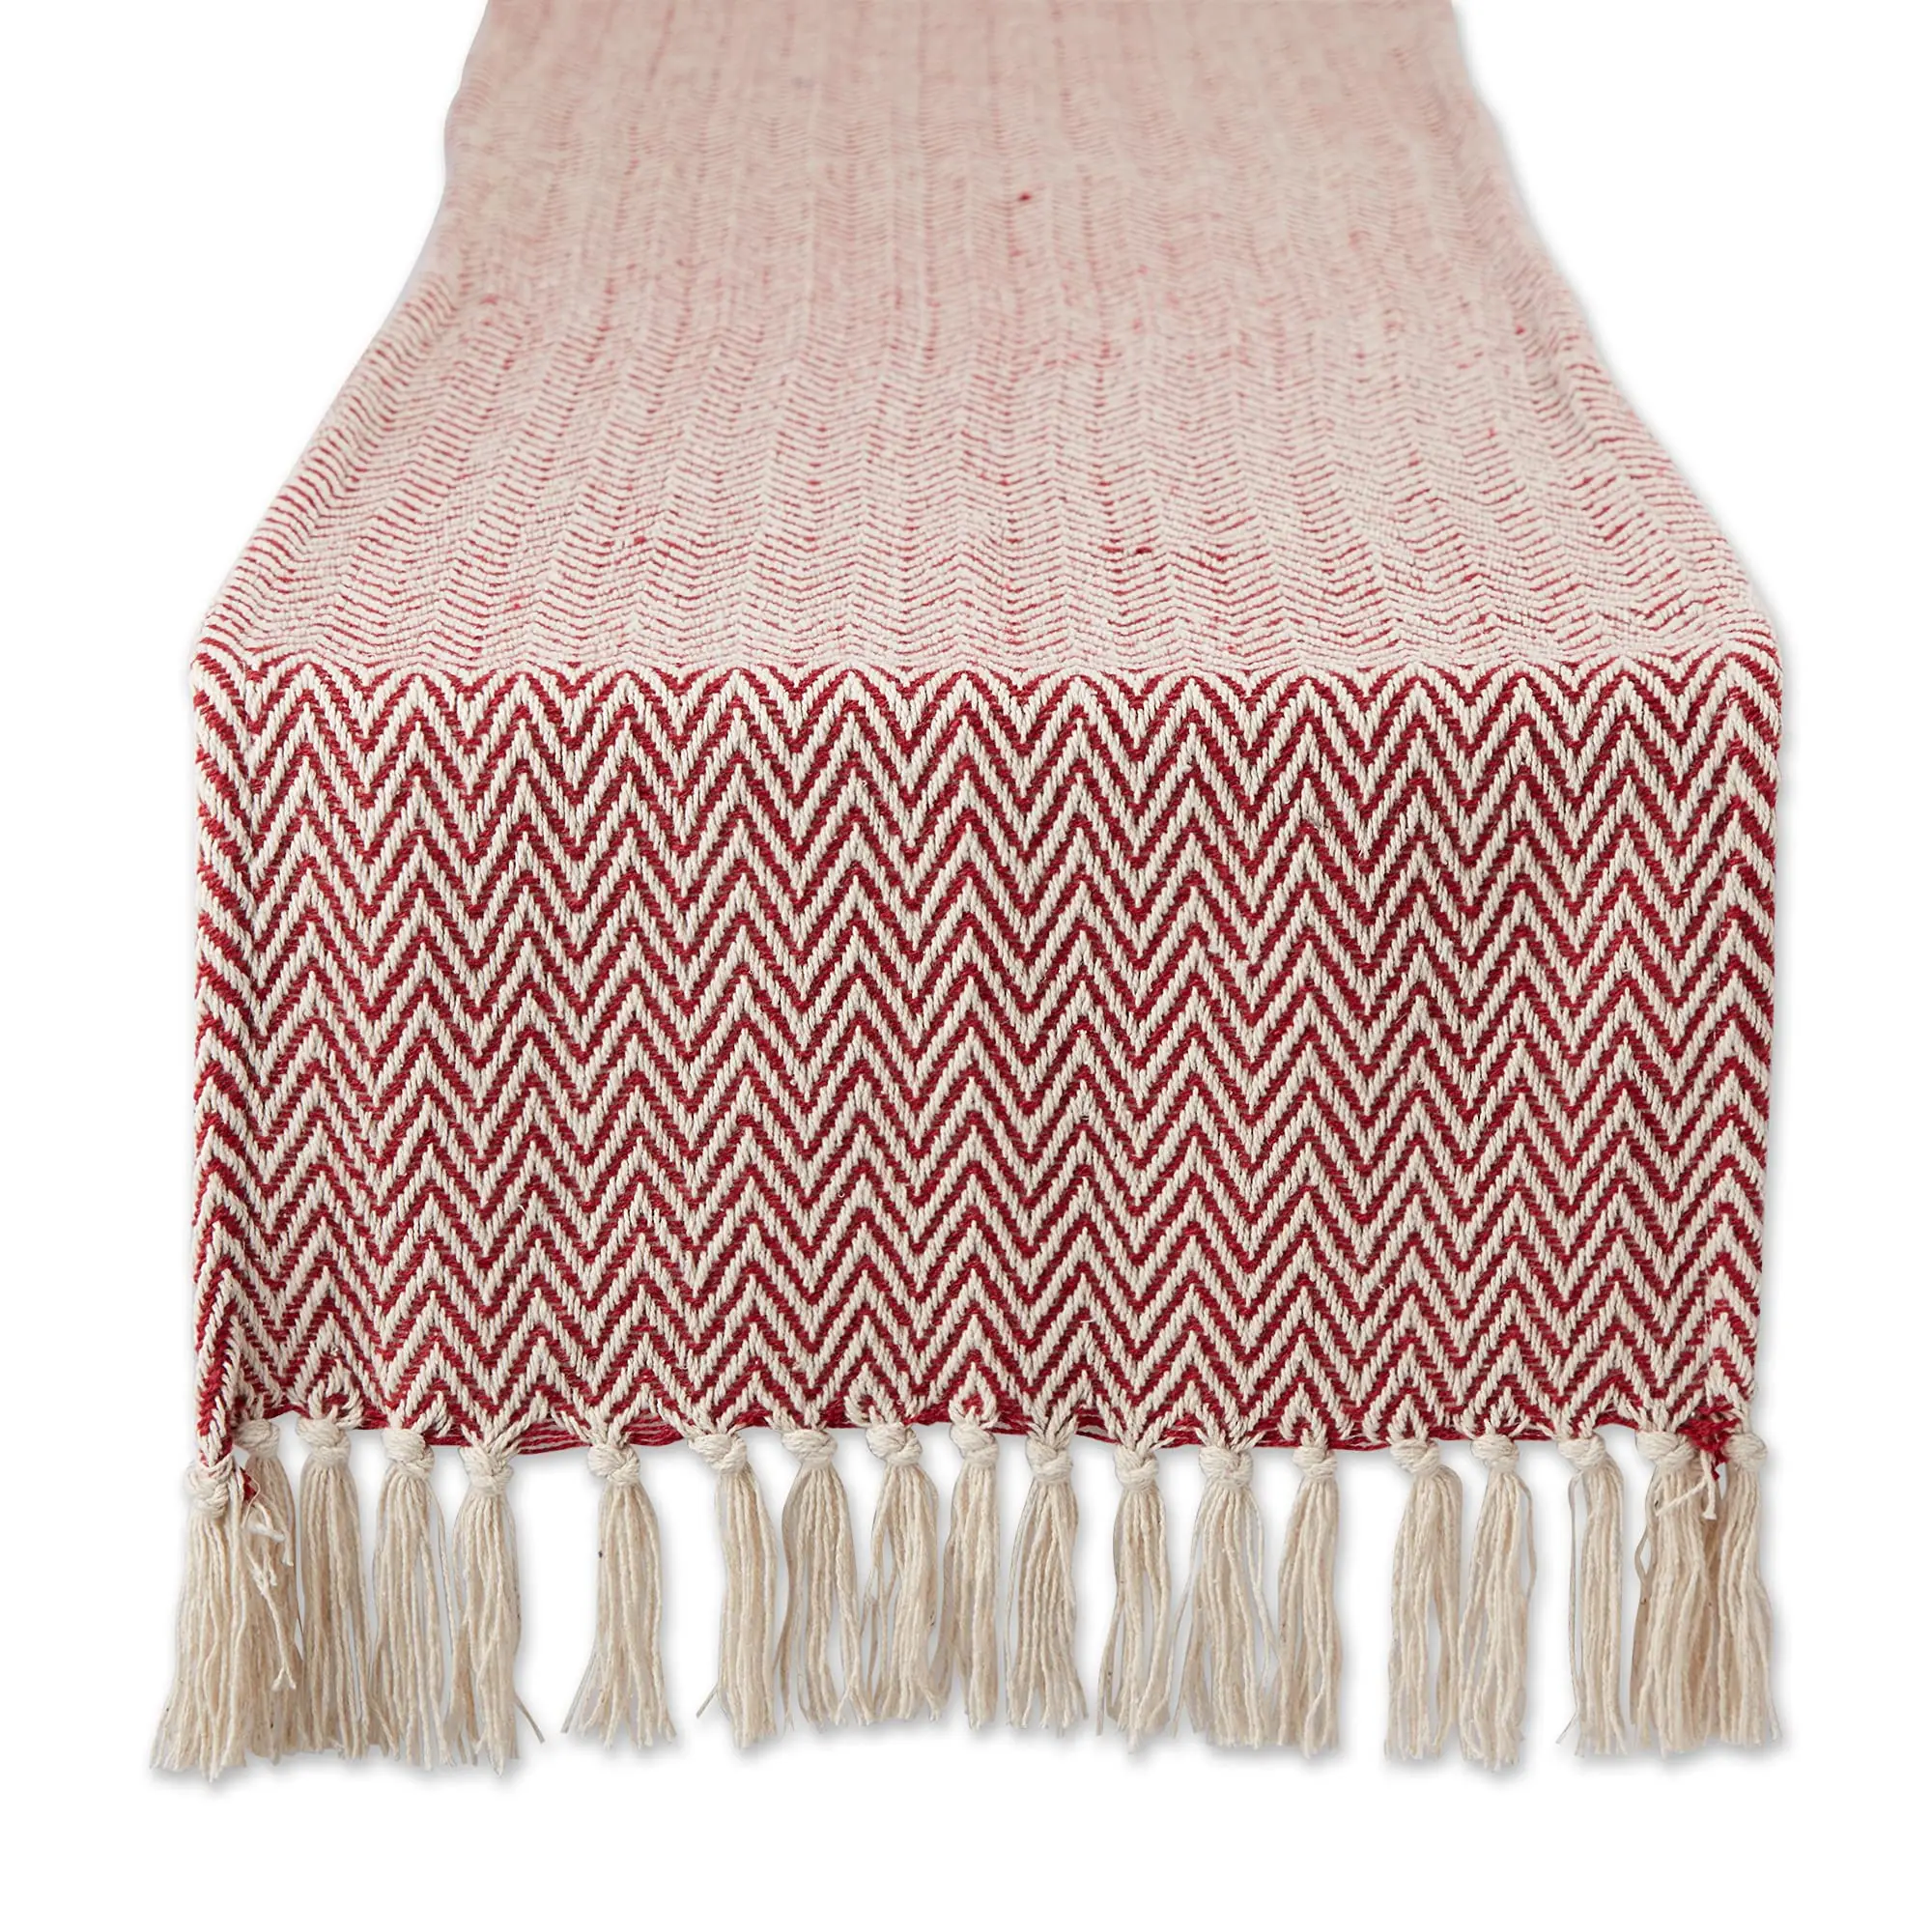 

Woven Basic Tabletop Collection Chevron Table Runner with Tassels, Rustic Table Runners for Table Decor,Wedding Holiday Party